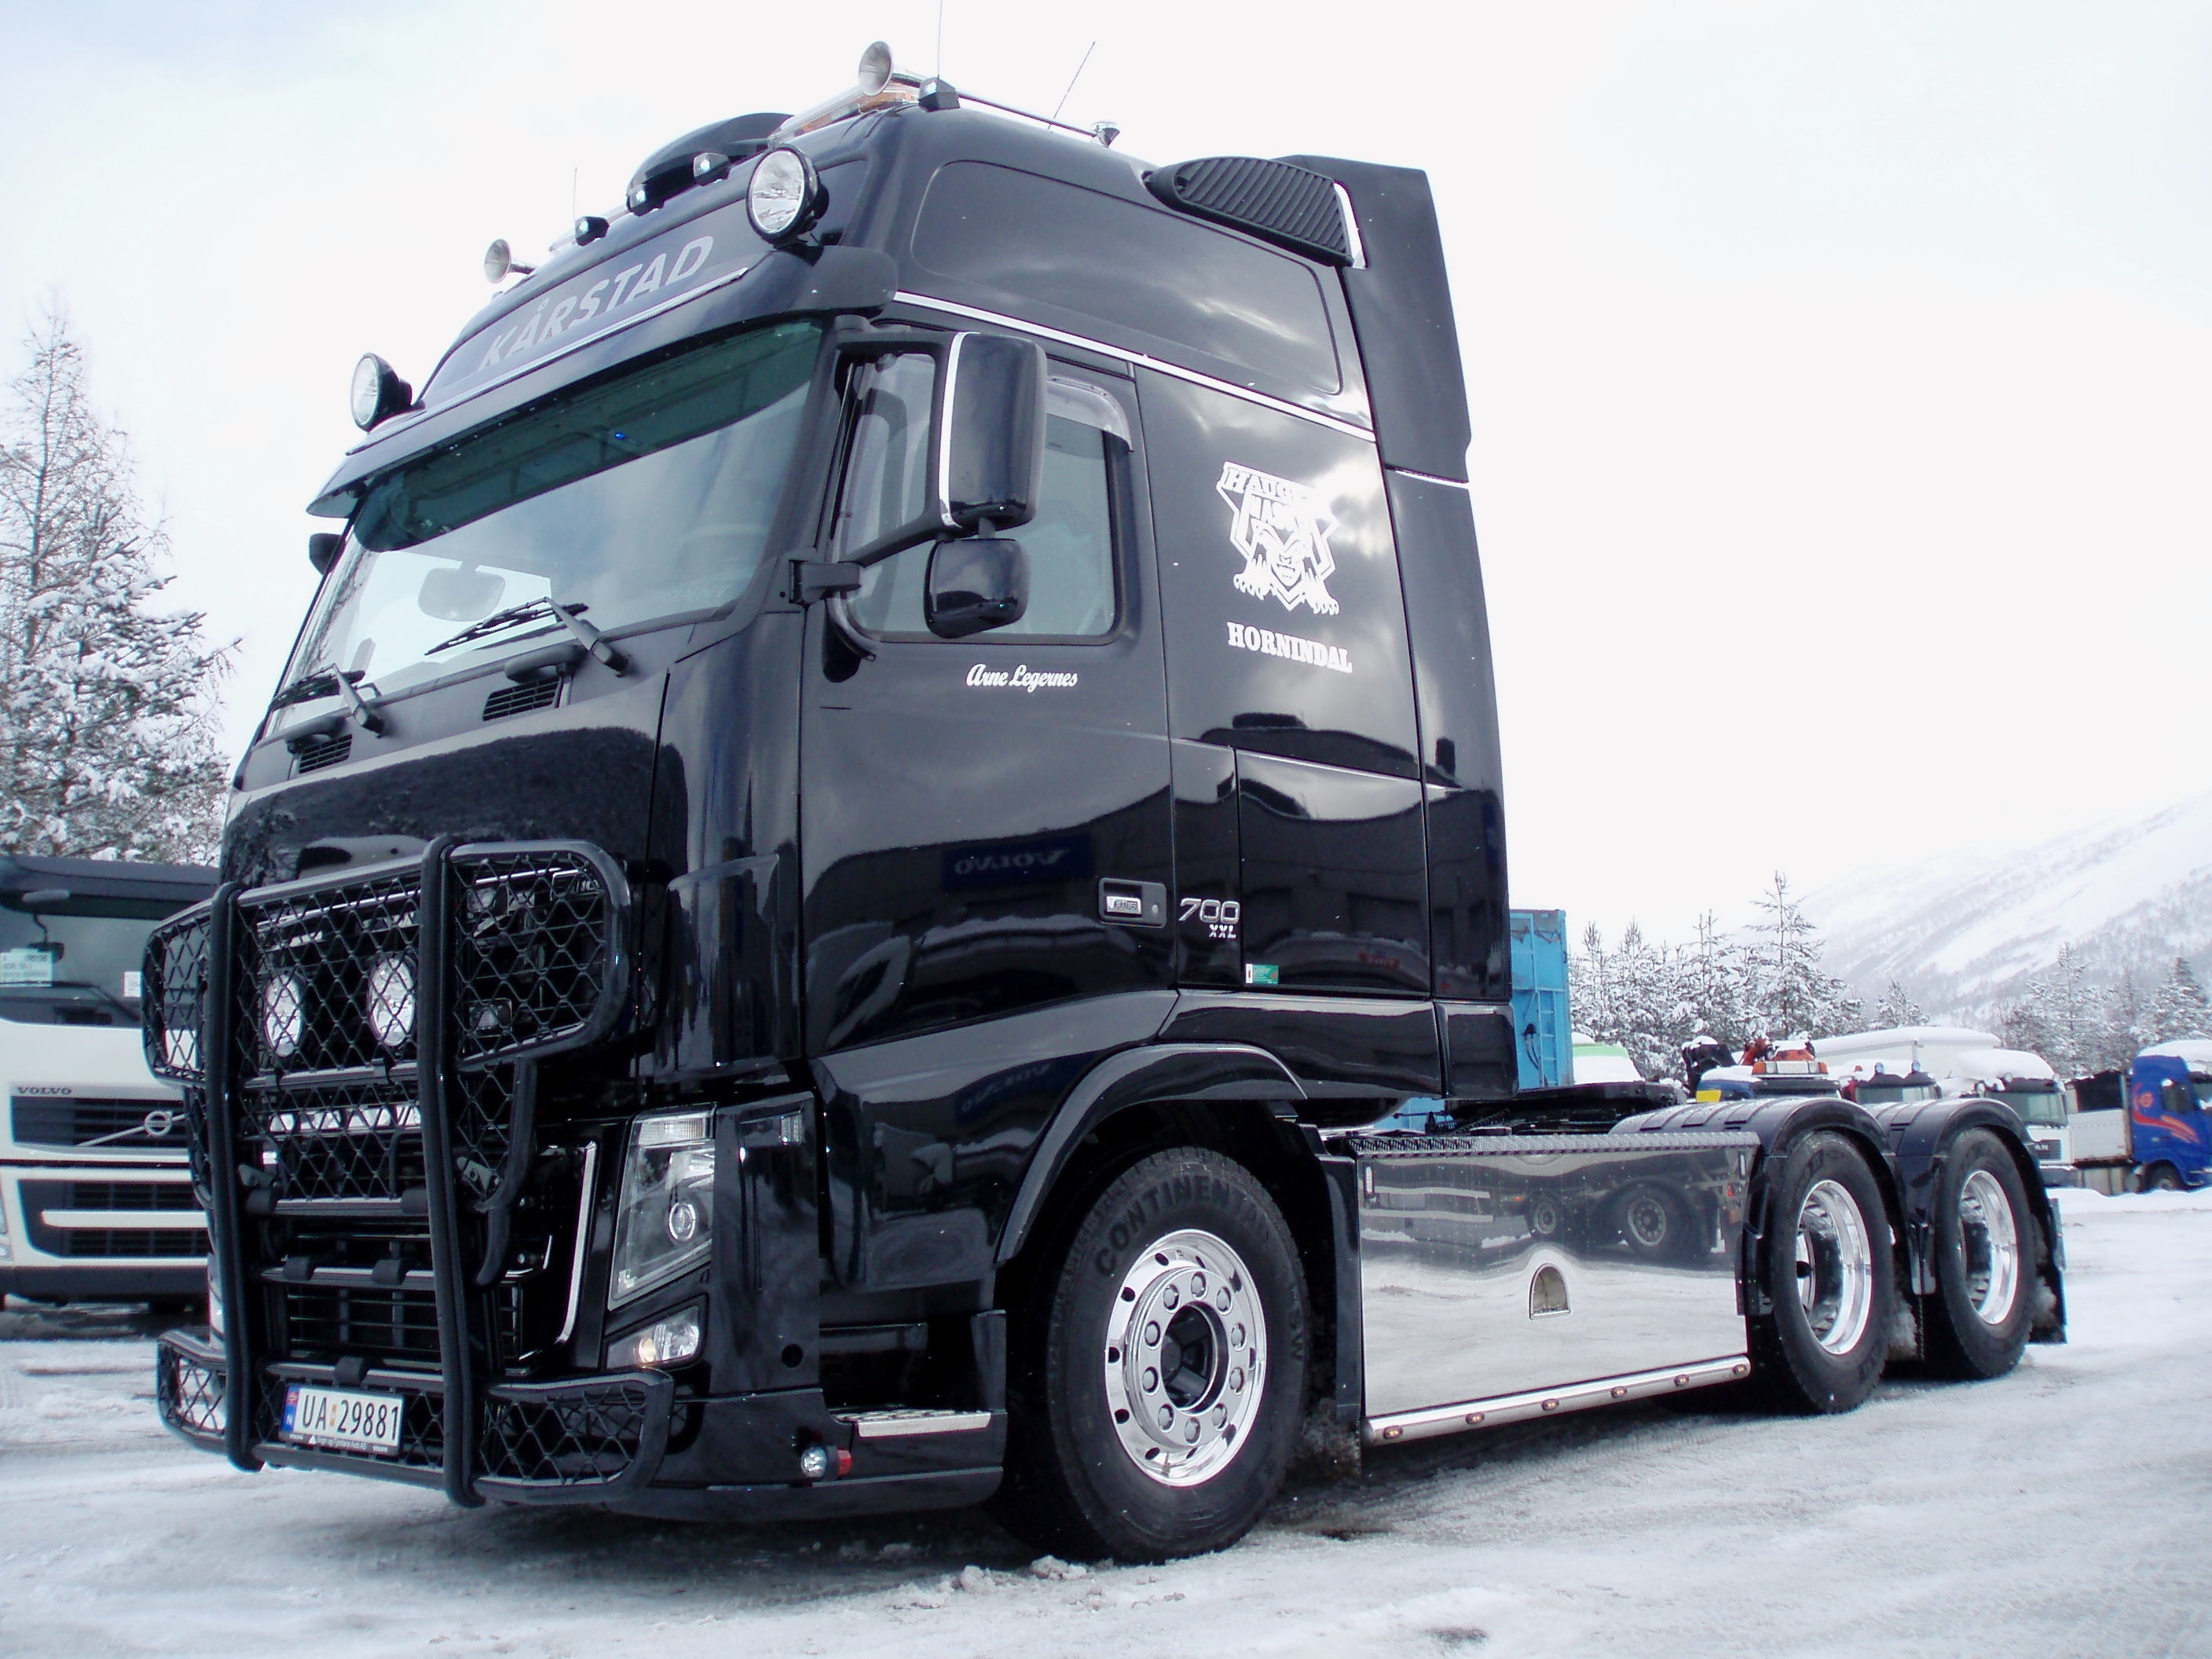 The Ultimate Volvo FH16.700 XXL! This is going to take some beating says